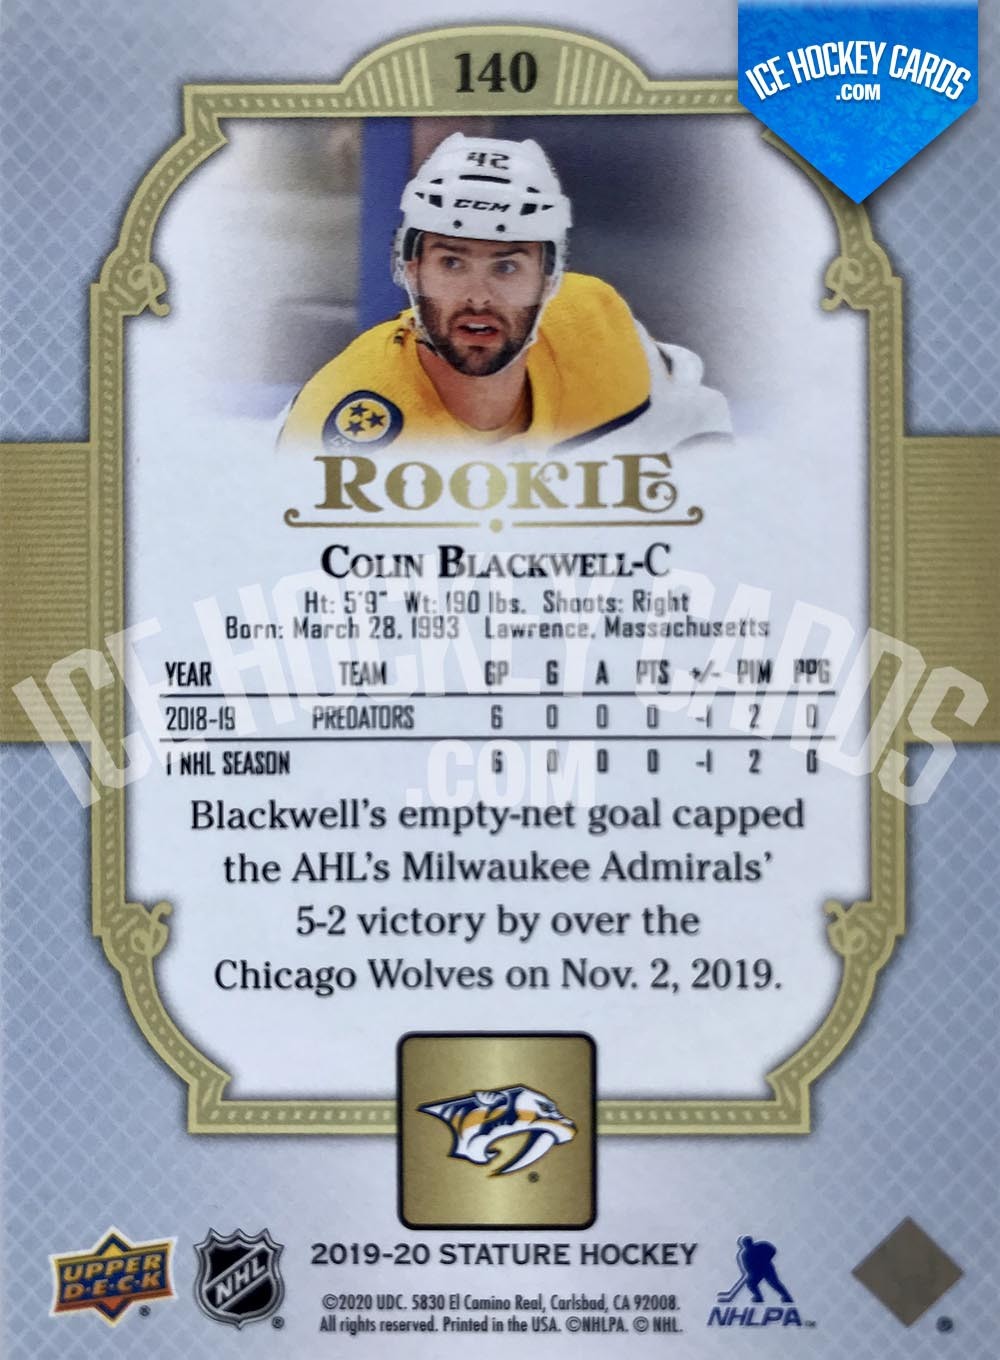 Upper Deck - Stature 2019-20 - Colin Blackwell Red Rookie Card # to 20 RARE back